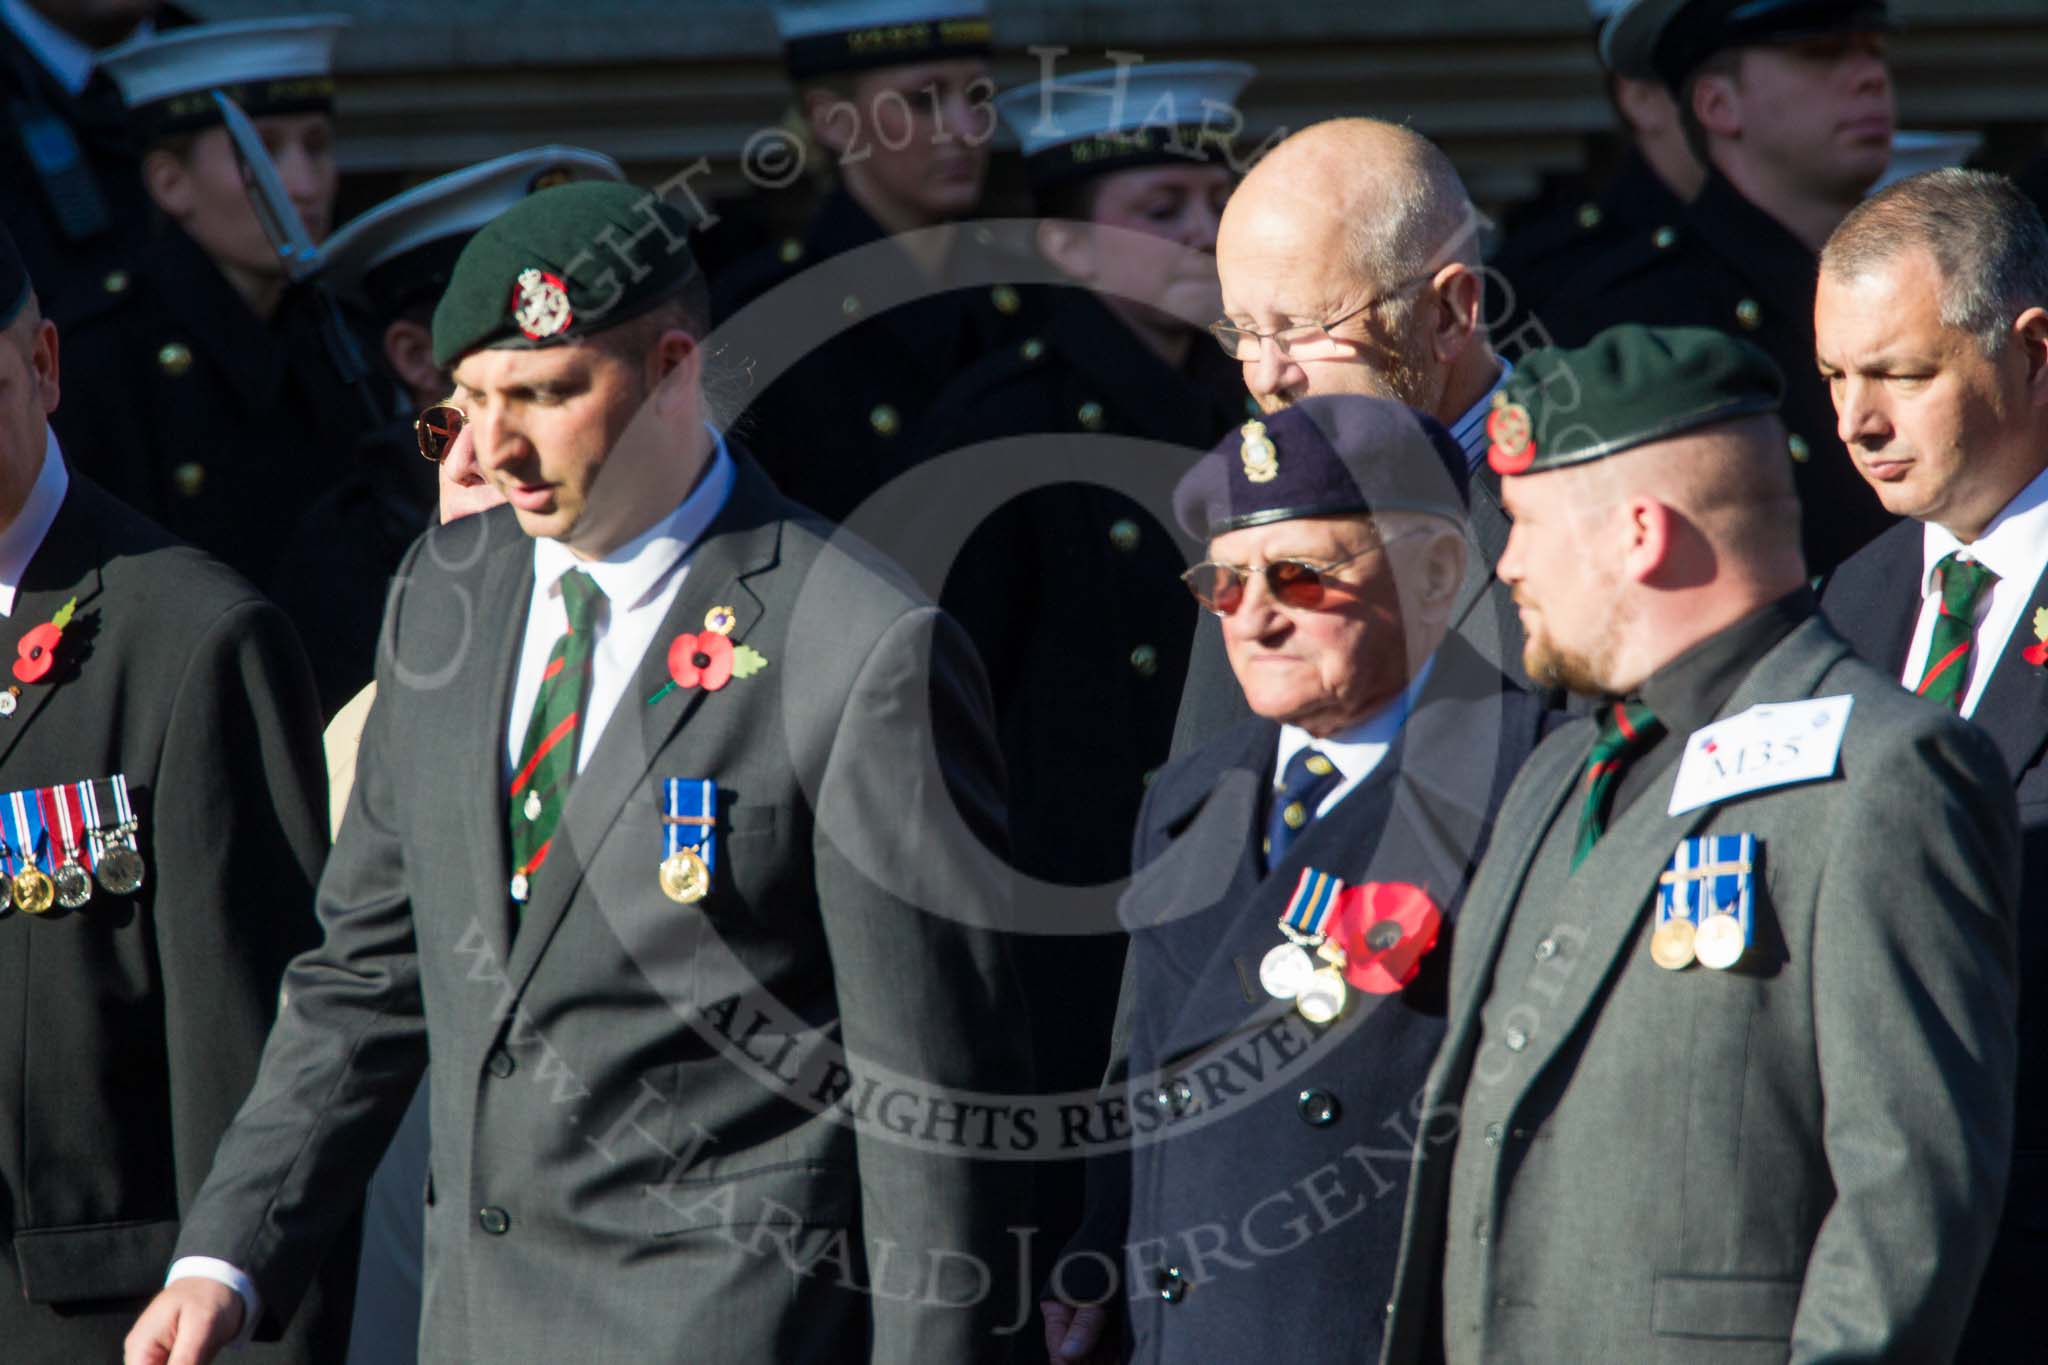 Remembrance Sunday at the Cenotaph in London 2014: Group M35 - Union Jack Club.
Press stand opposite the Foreign Office building, Whitehall, London SW1,
London,
Greater London,
United Kingdom,
on 09 November 2014 at 12:19, image #2260